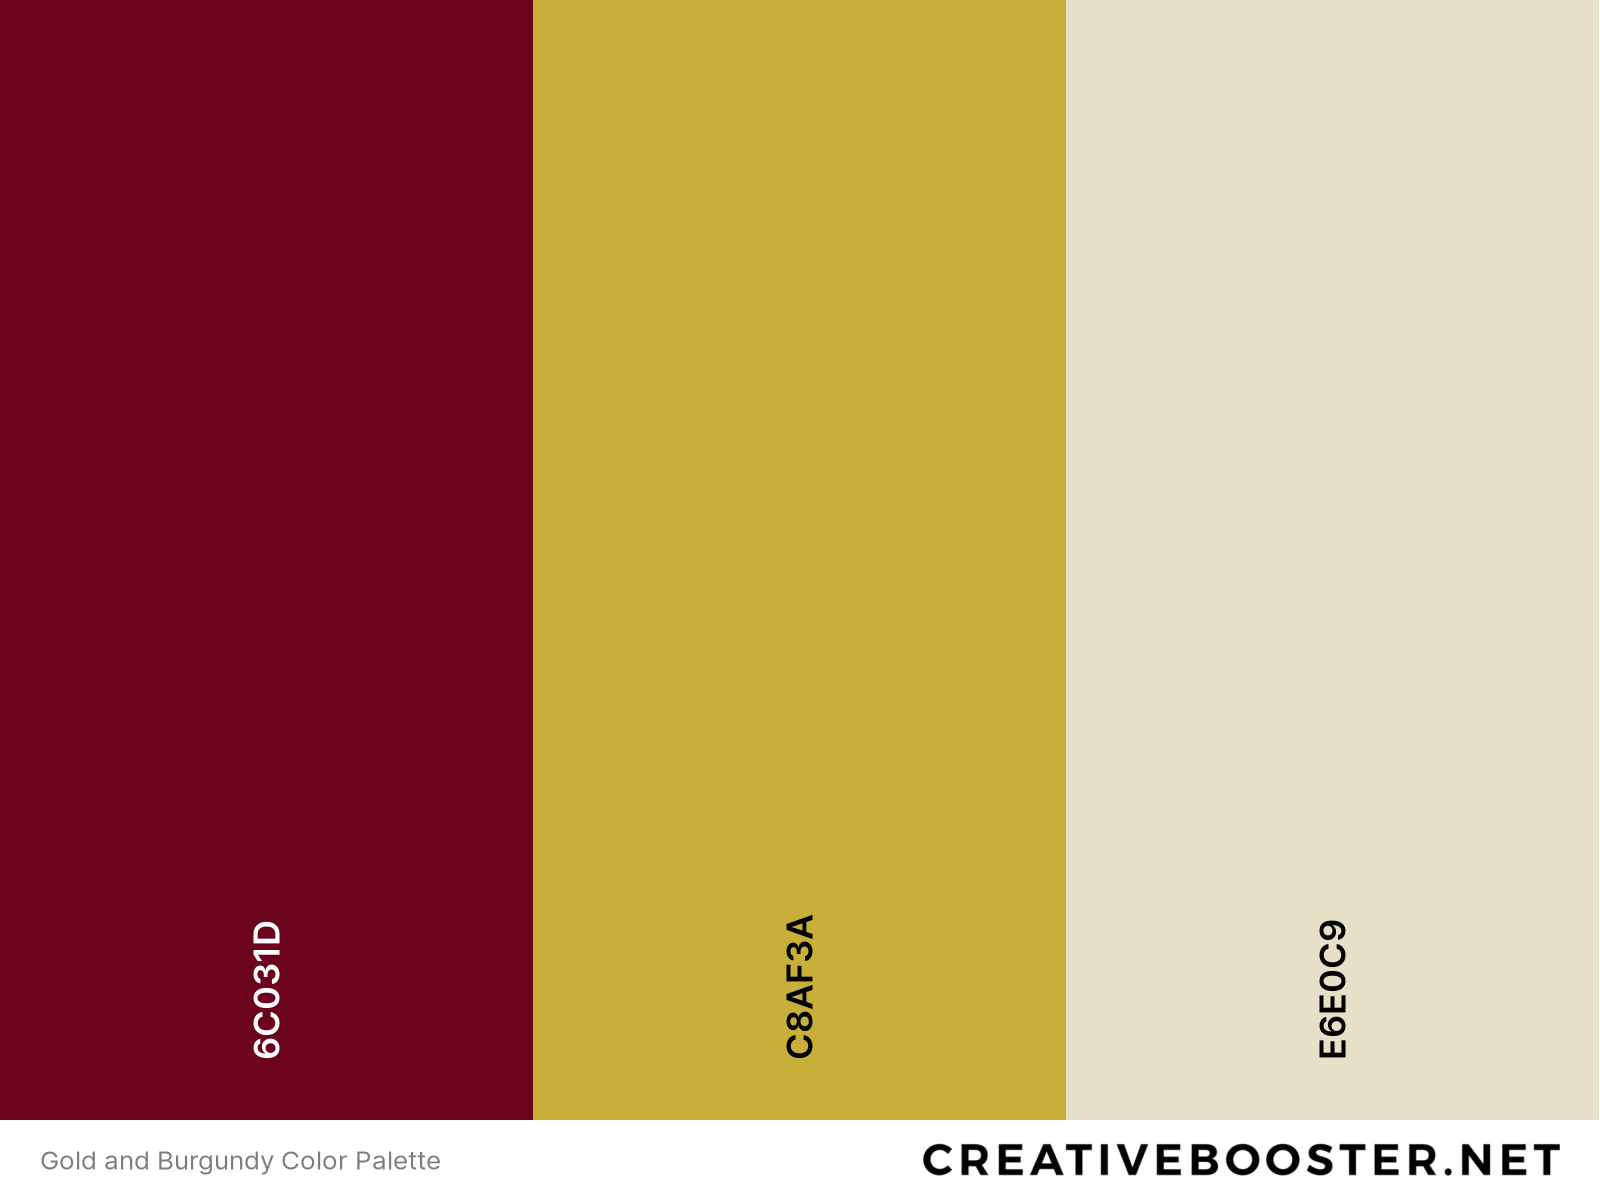 Gold and Burgundy Color Palette